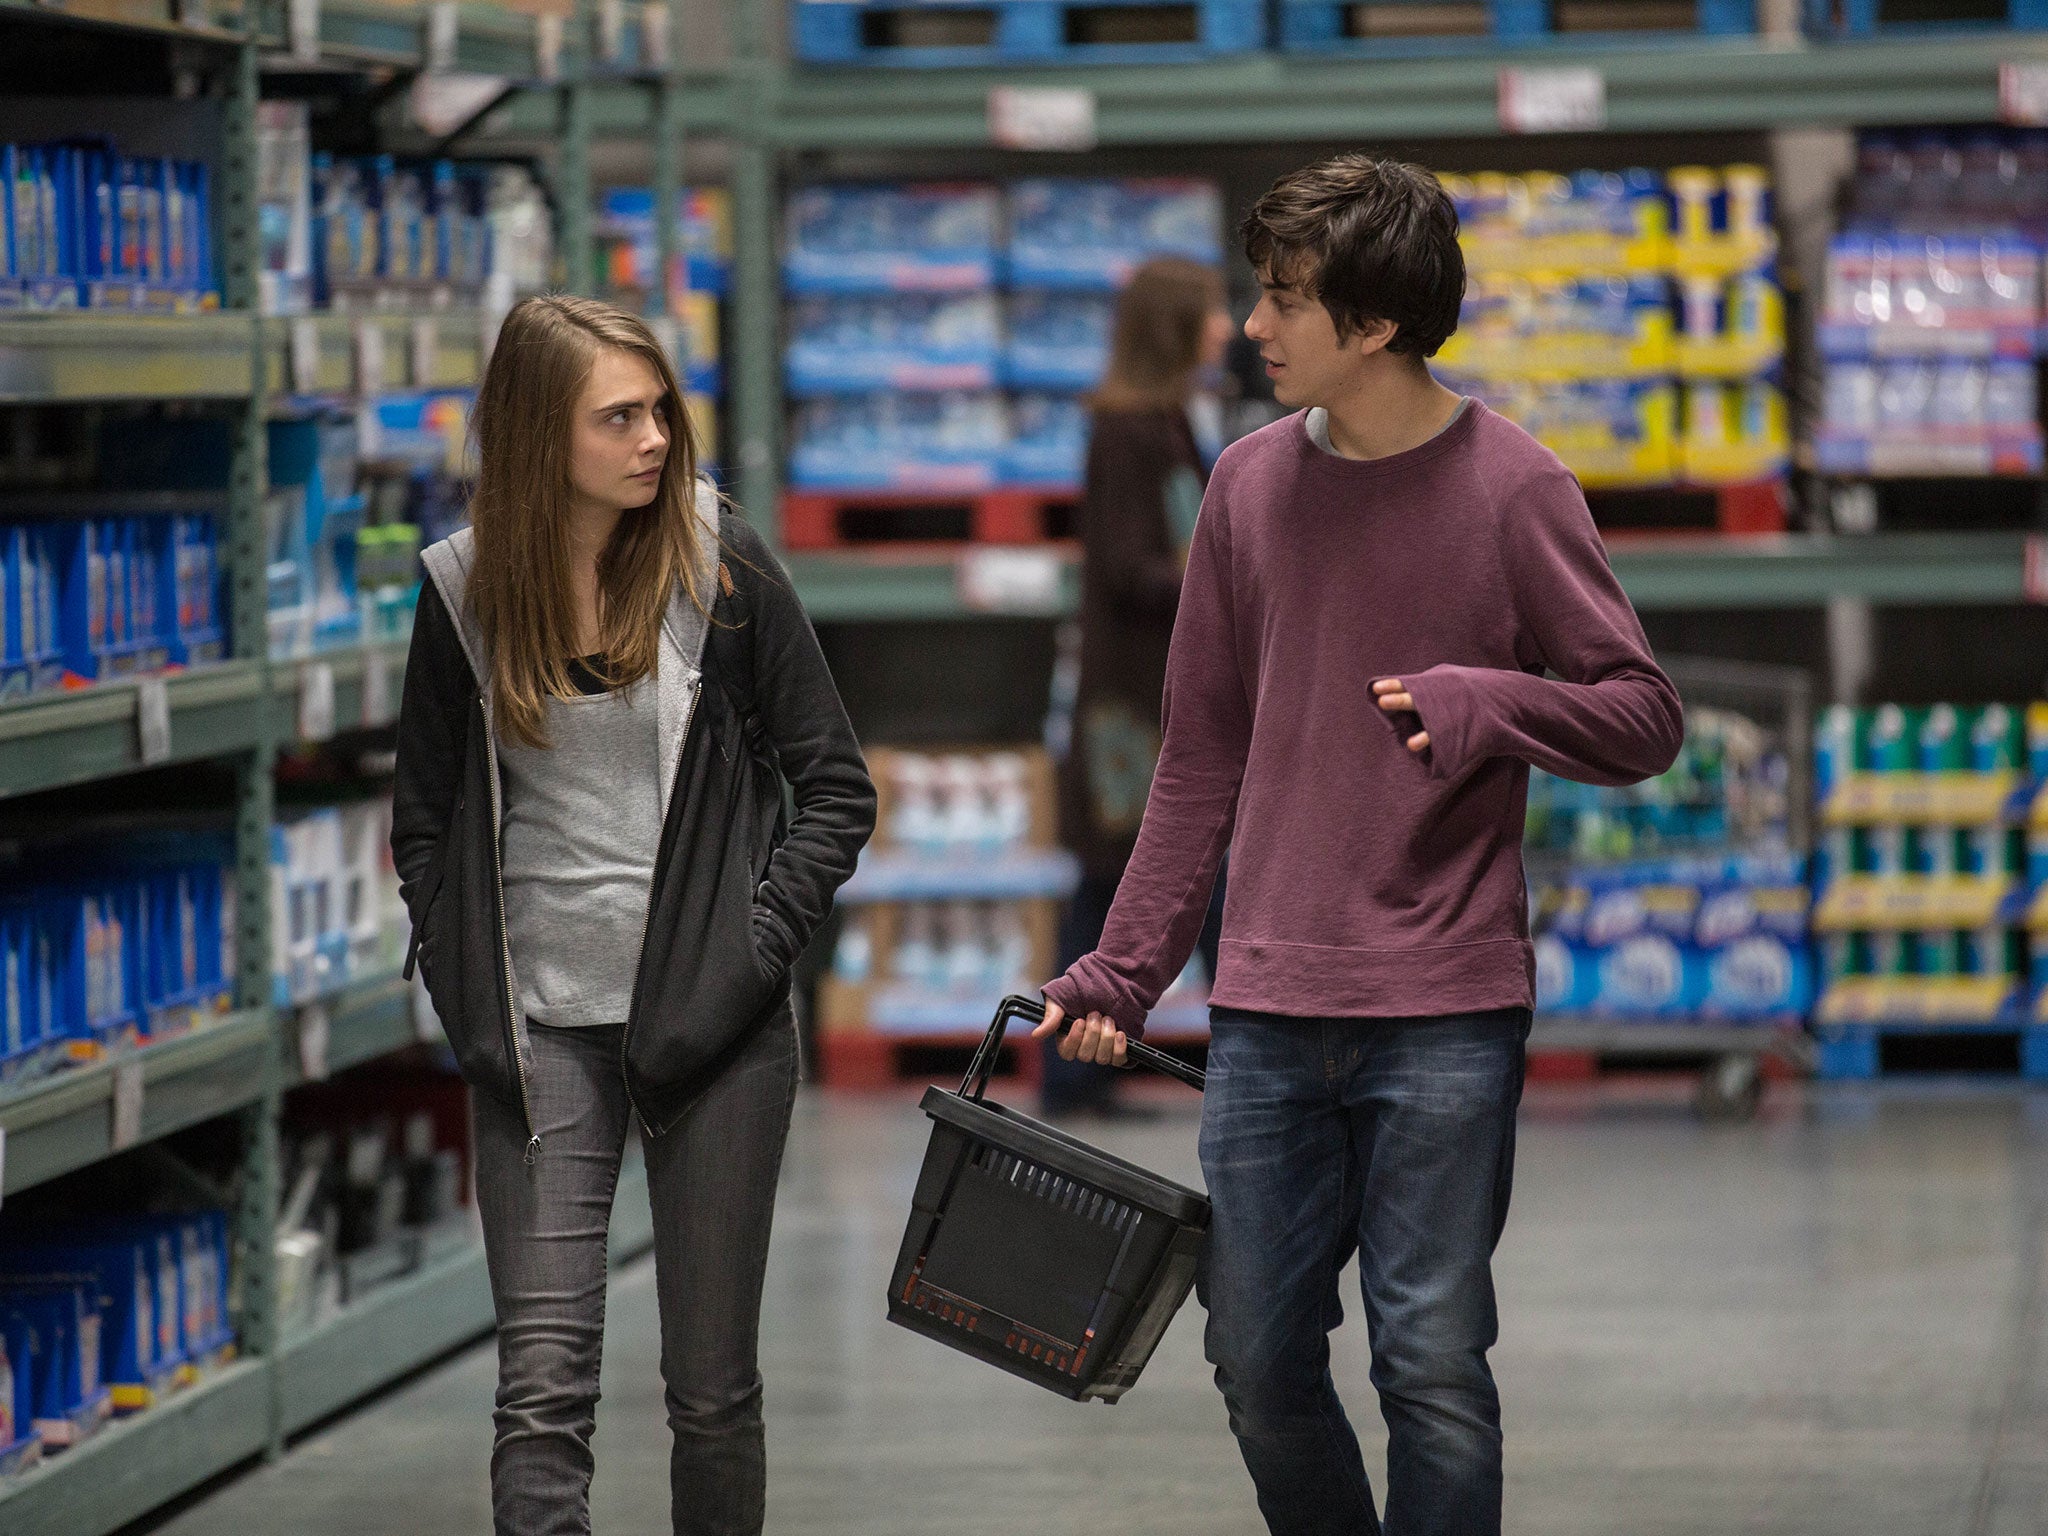 paper towns movie review